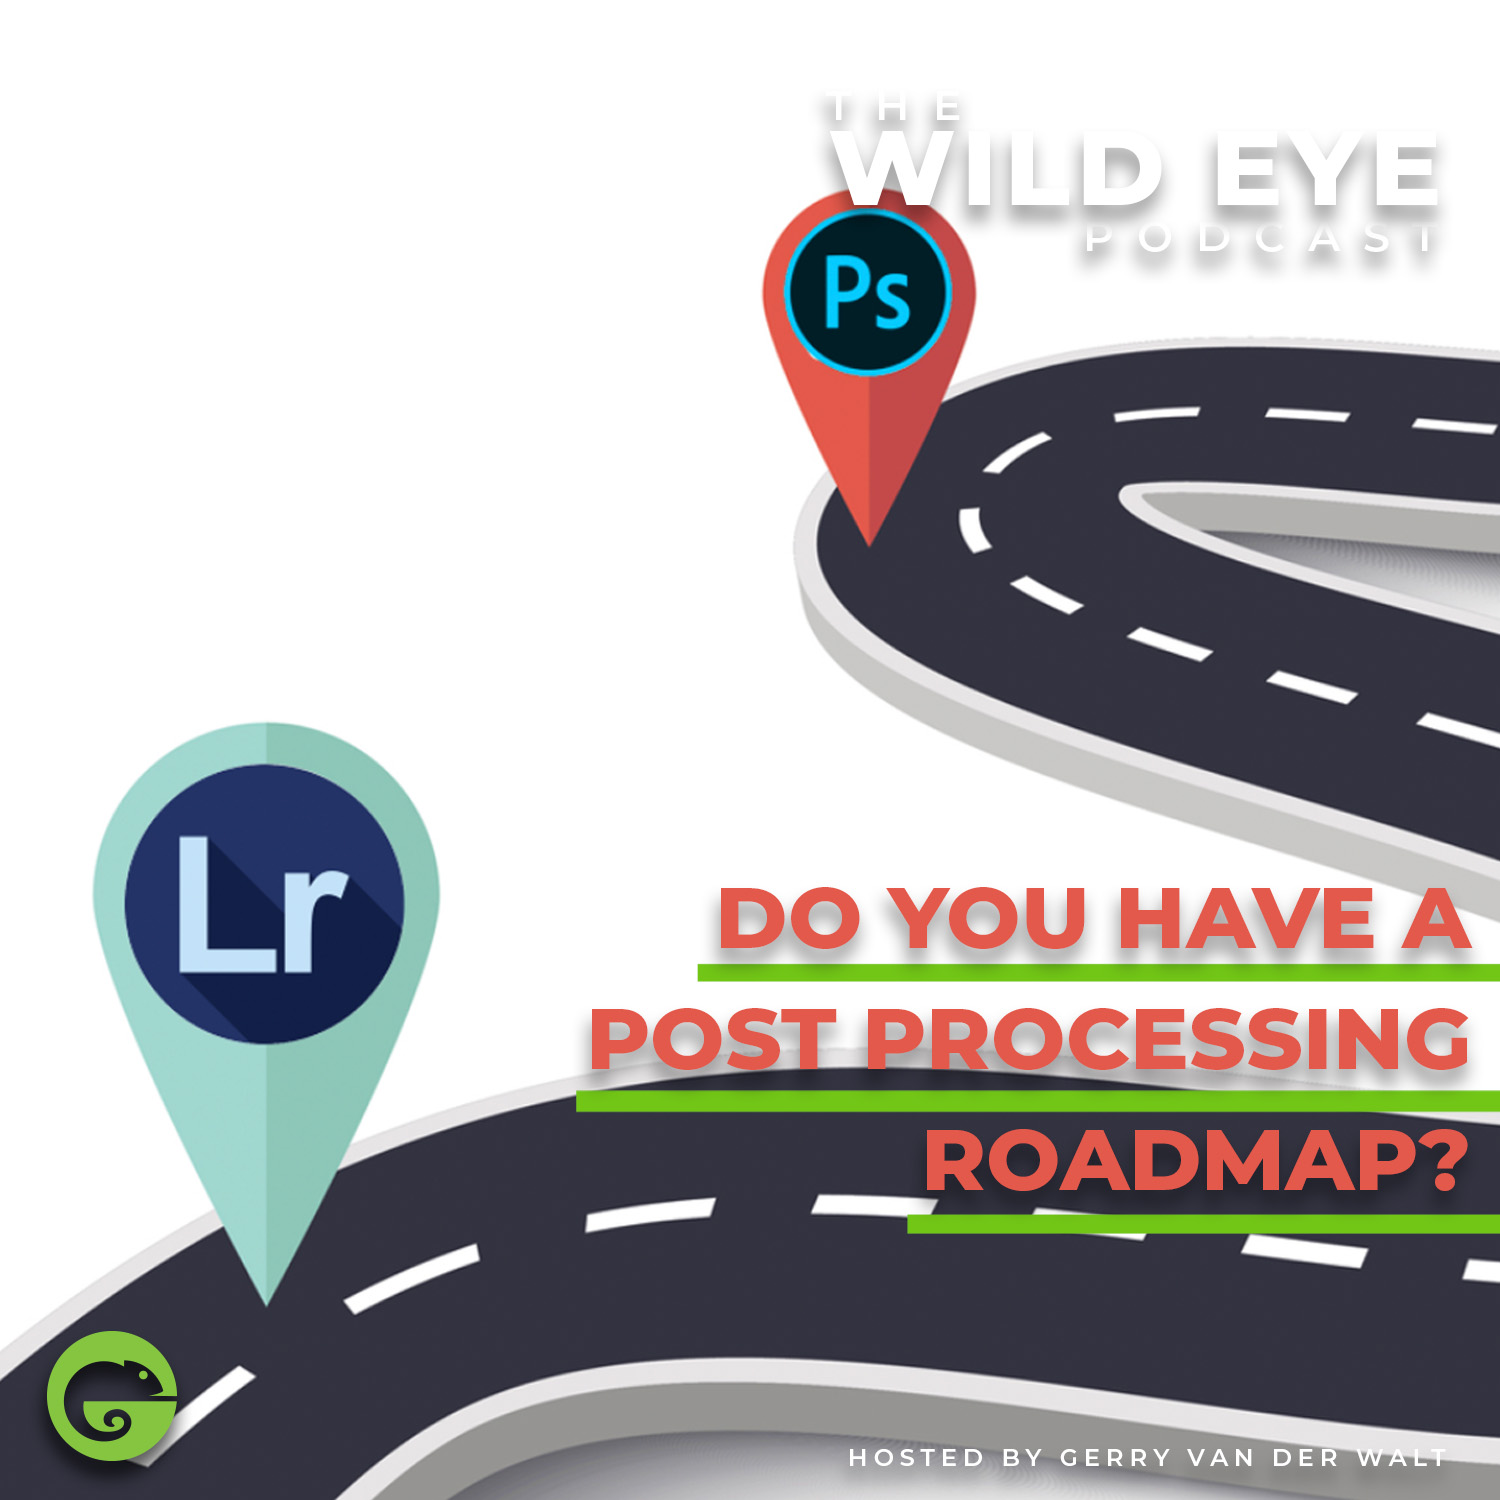 #449 - Do you have a post-processing roadmap?